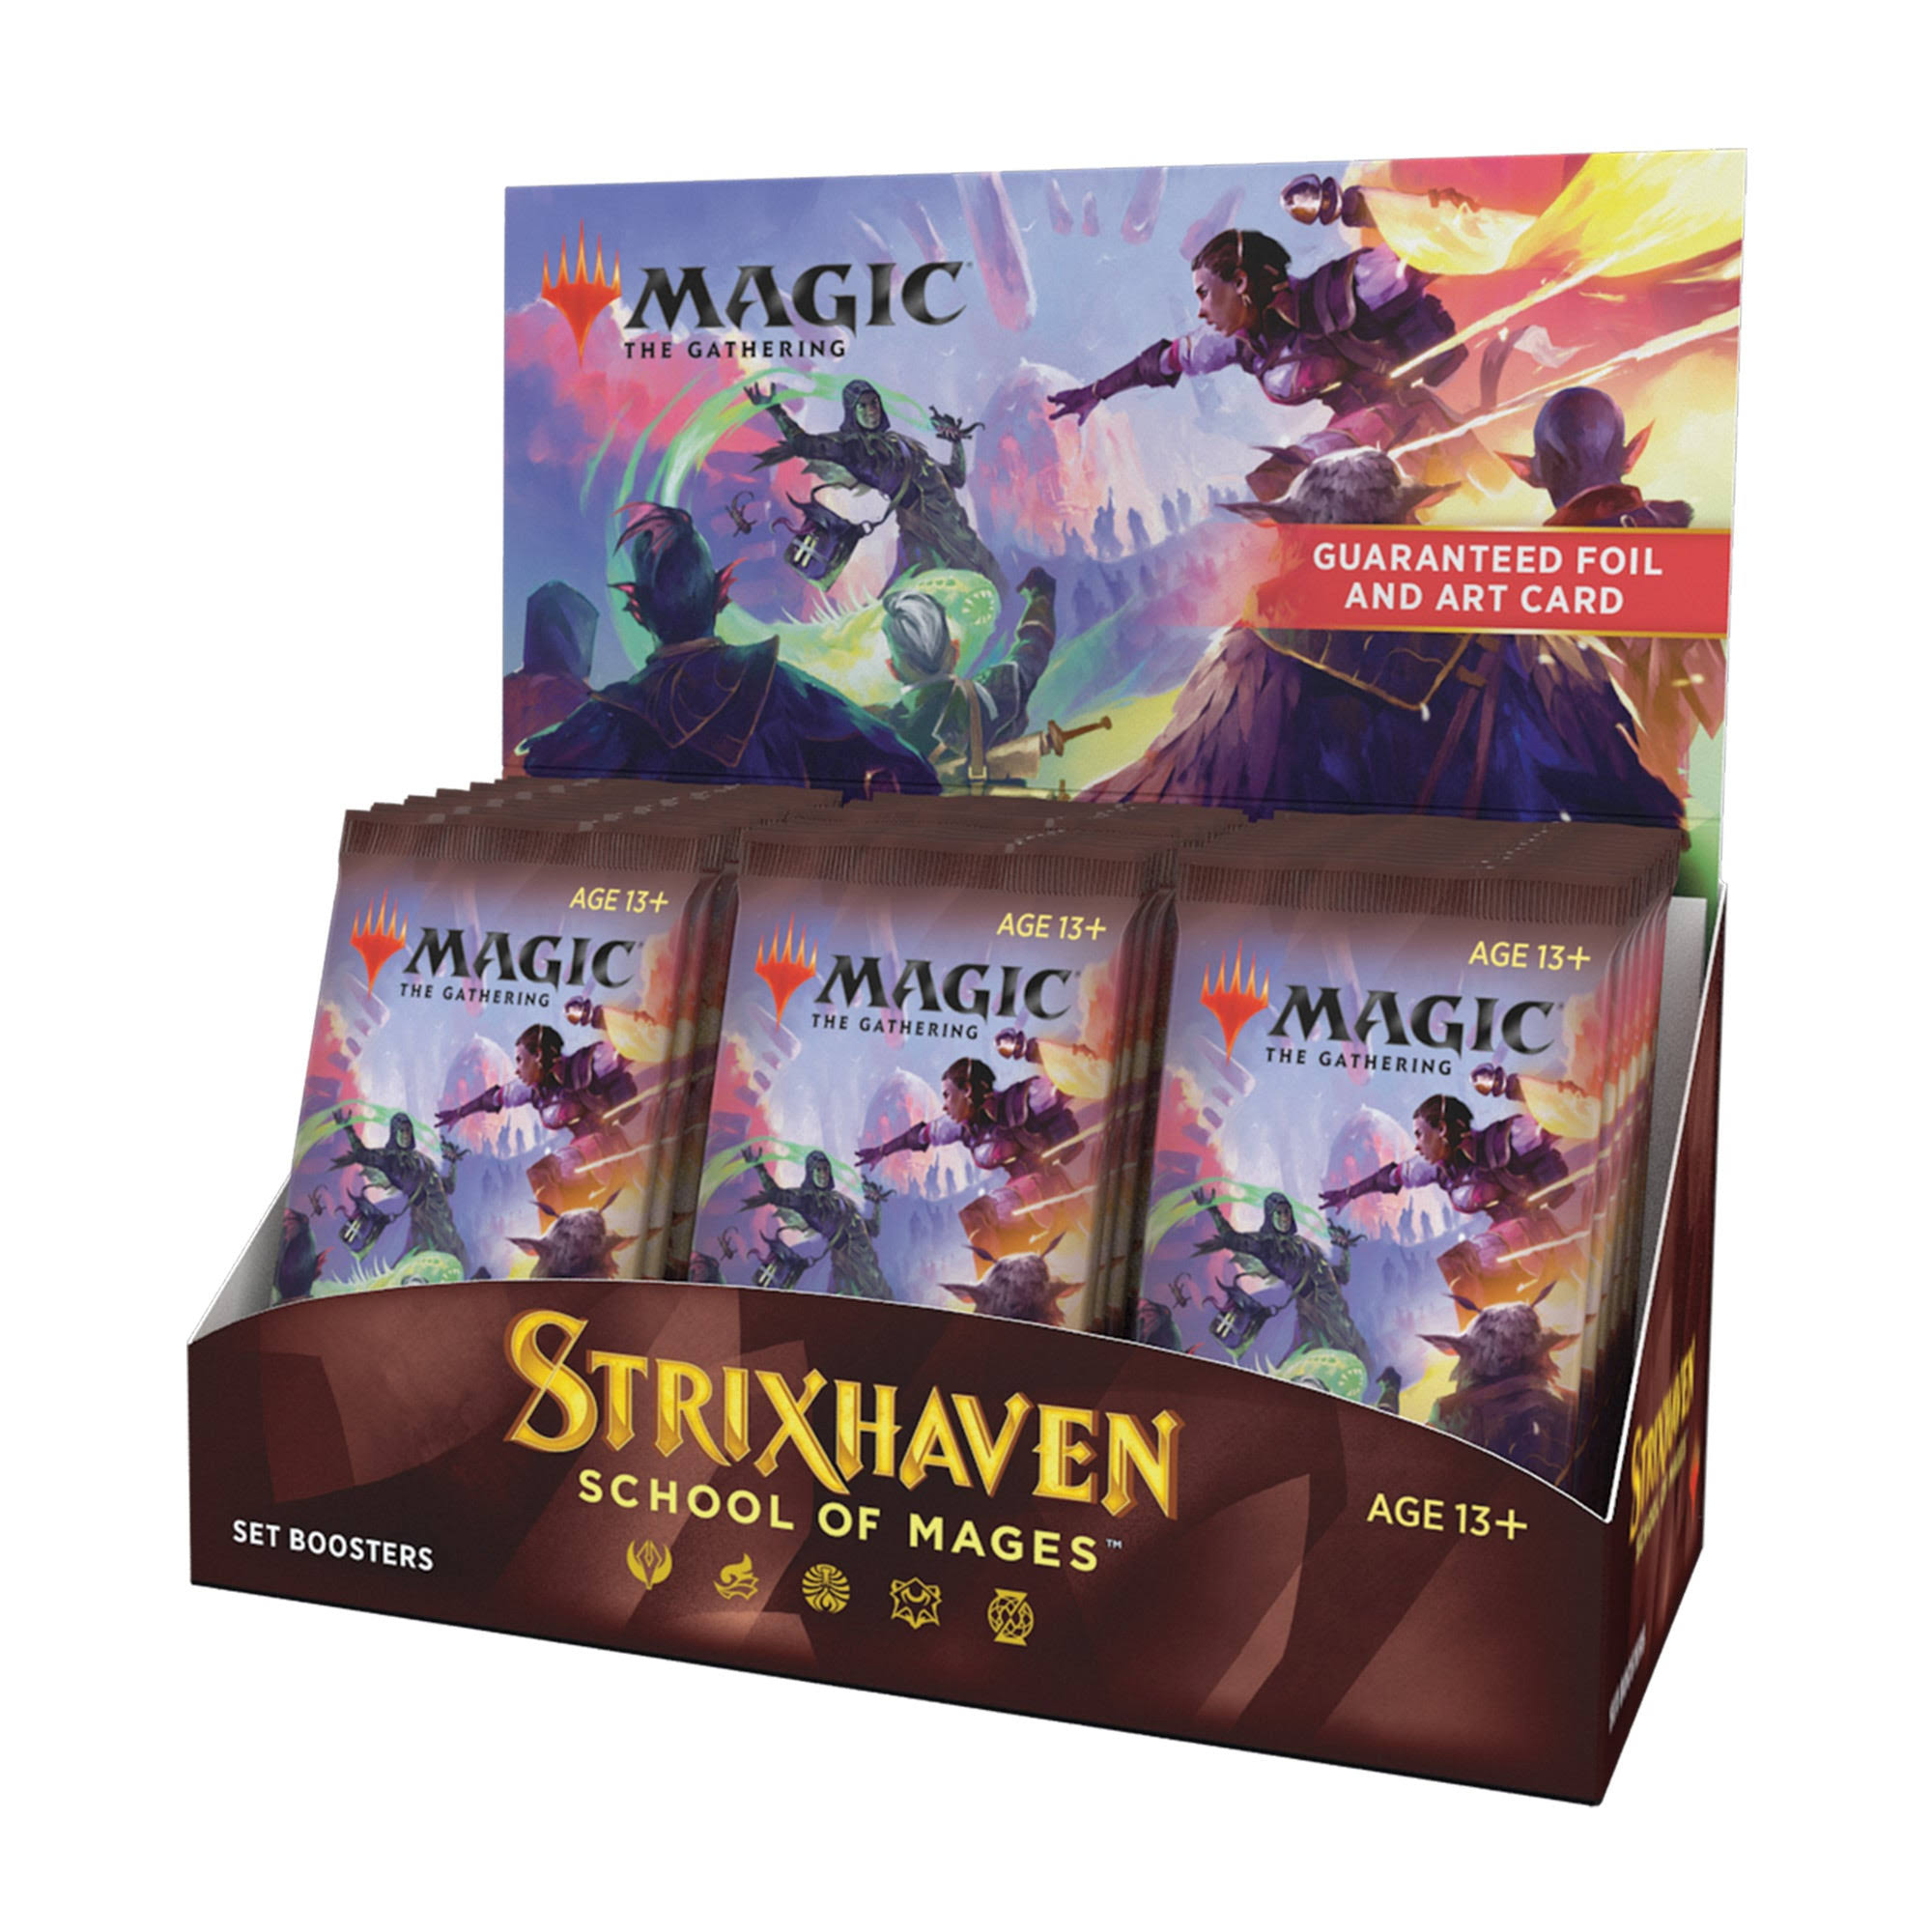 Magic The Gathering Set Booster Box - Strixhaven: School of Mages